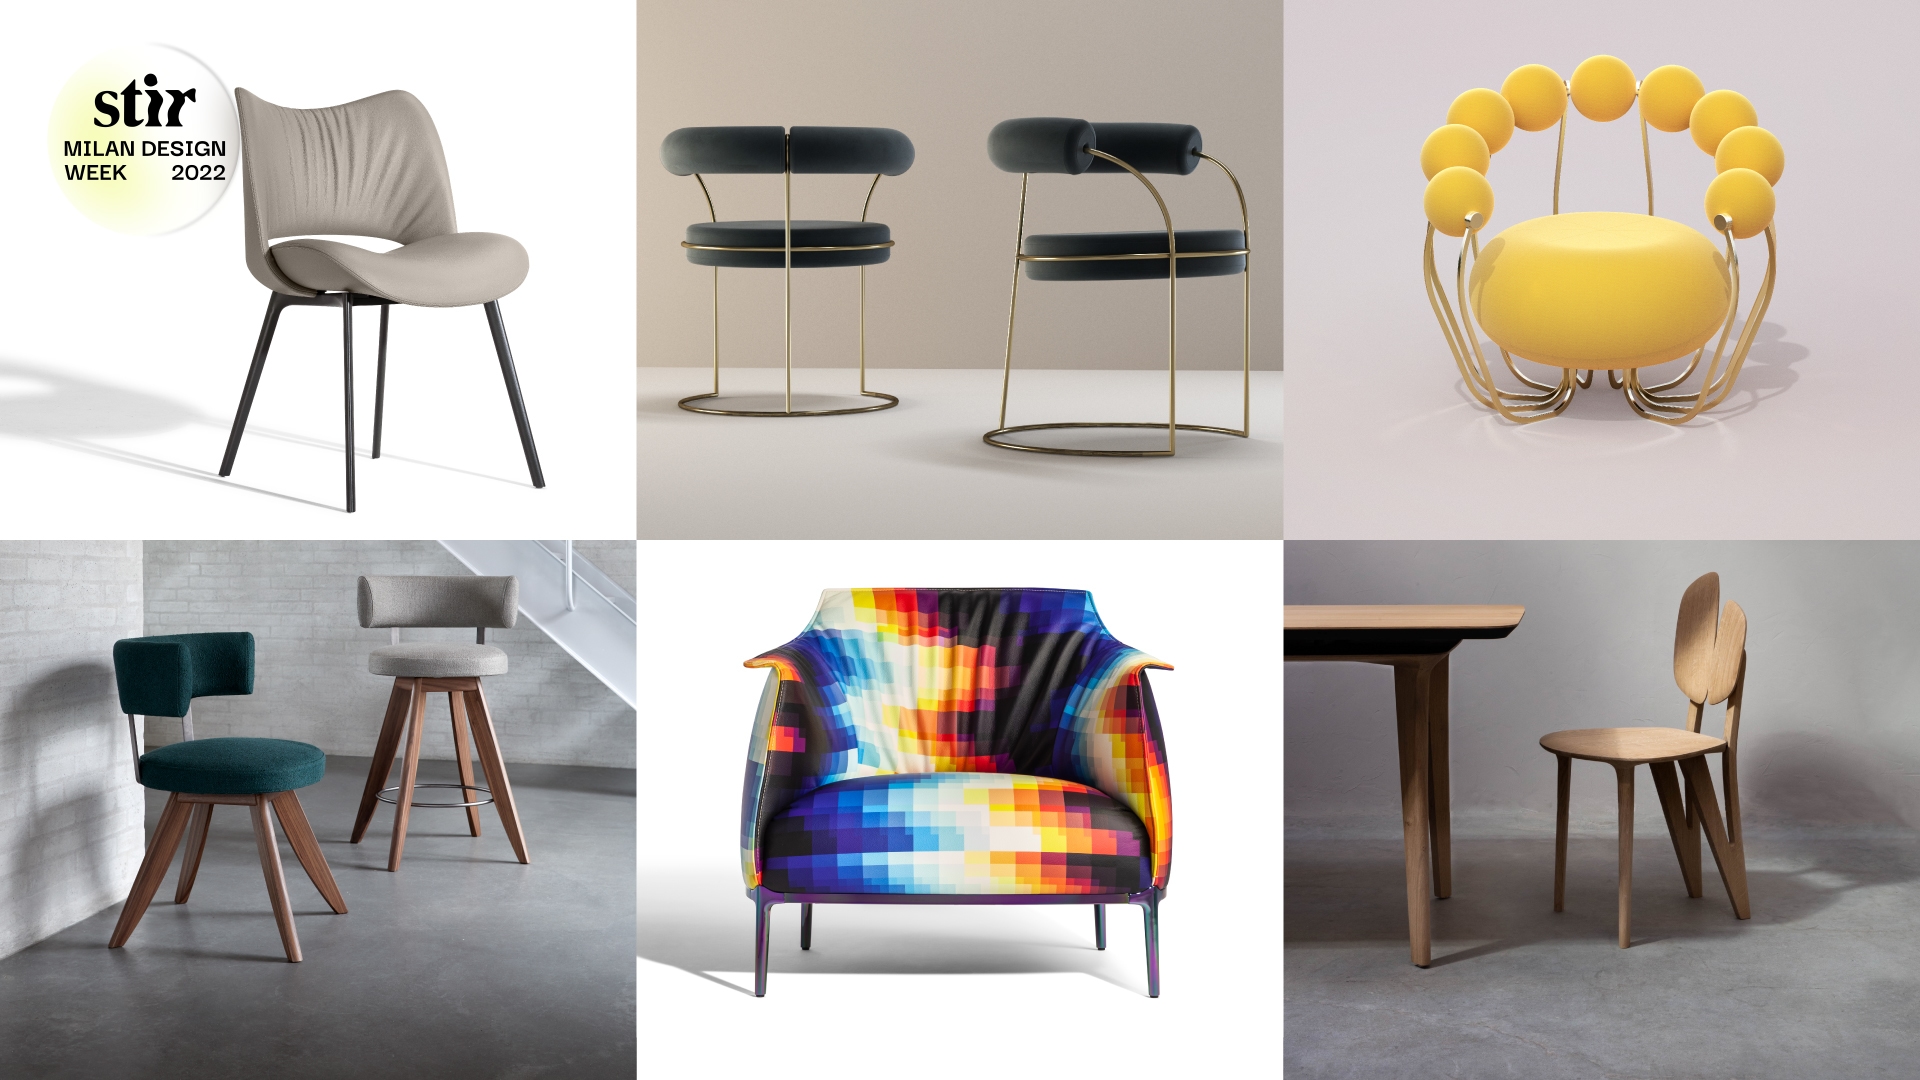 Salone 2022 calls attention to innovation and artistry in chair designs